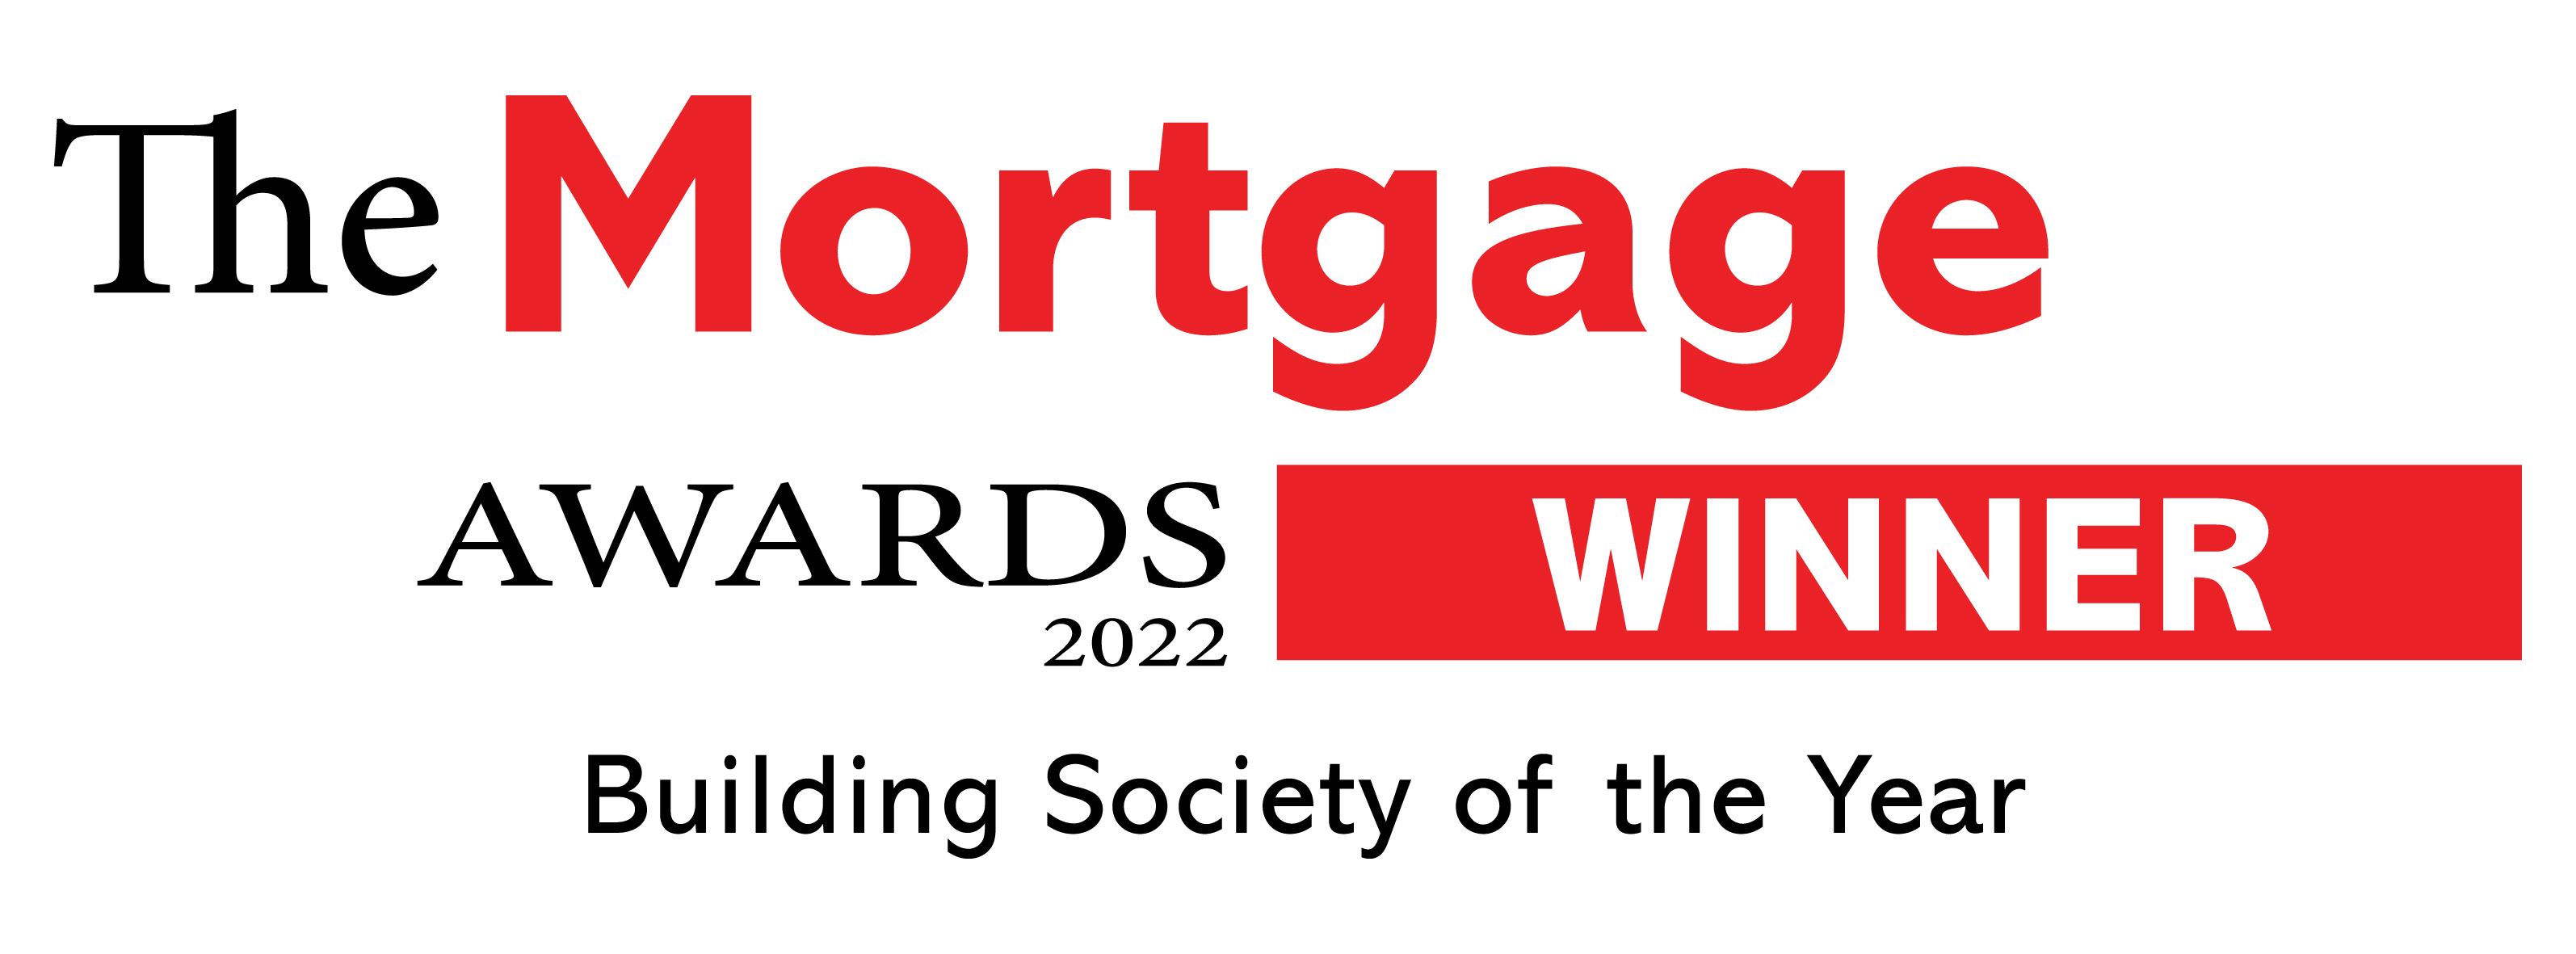 The Mortgage Awards 2022 Winner - Building Society of the Year